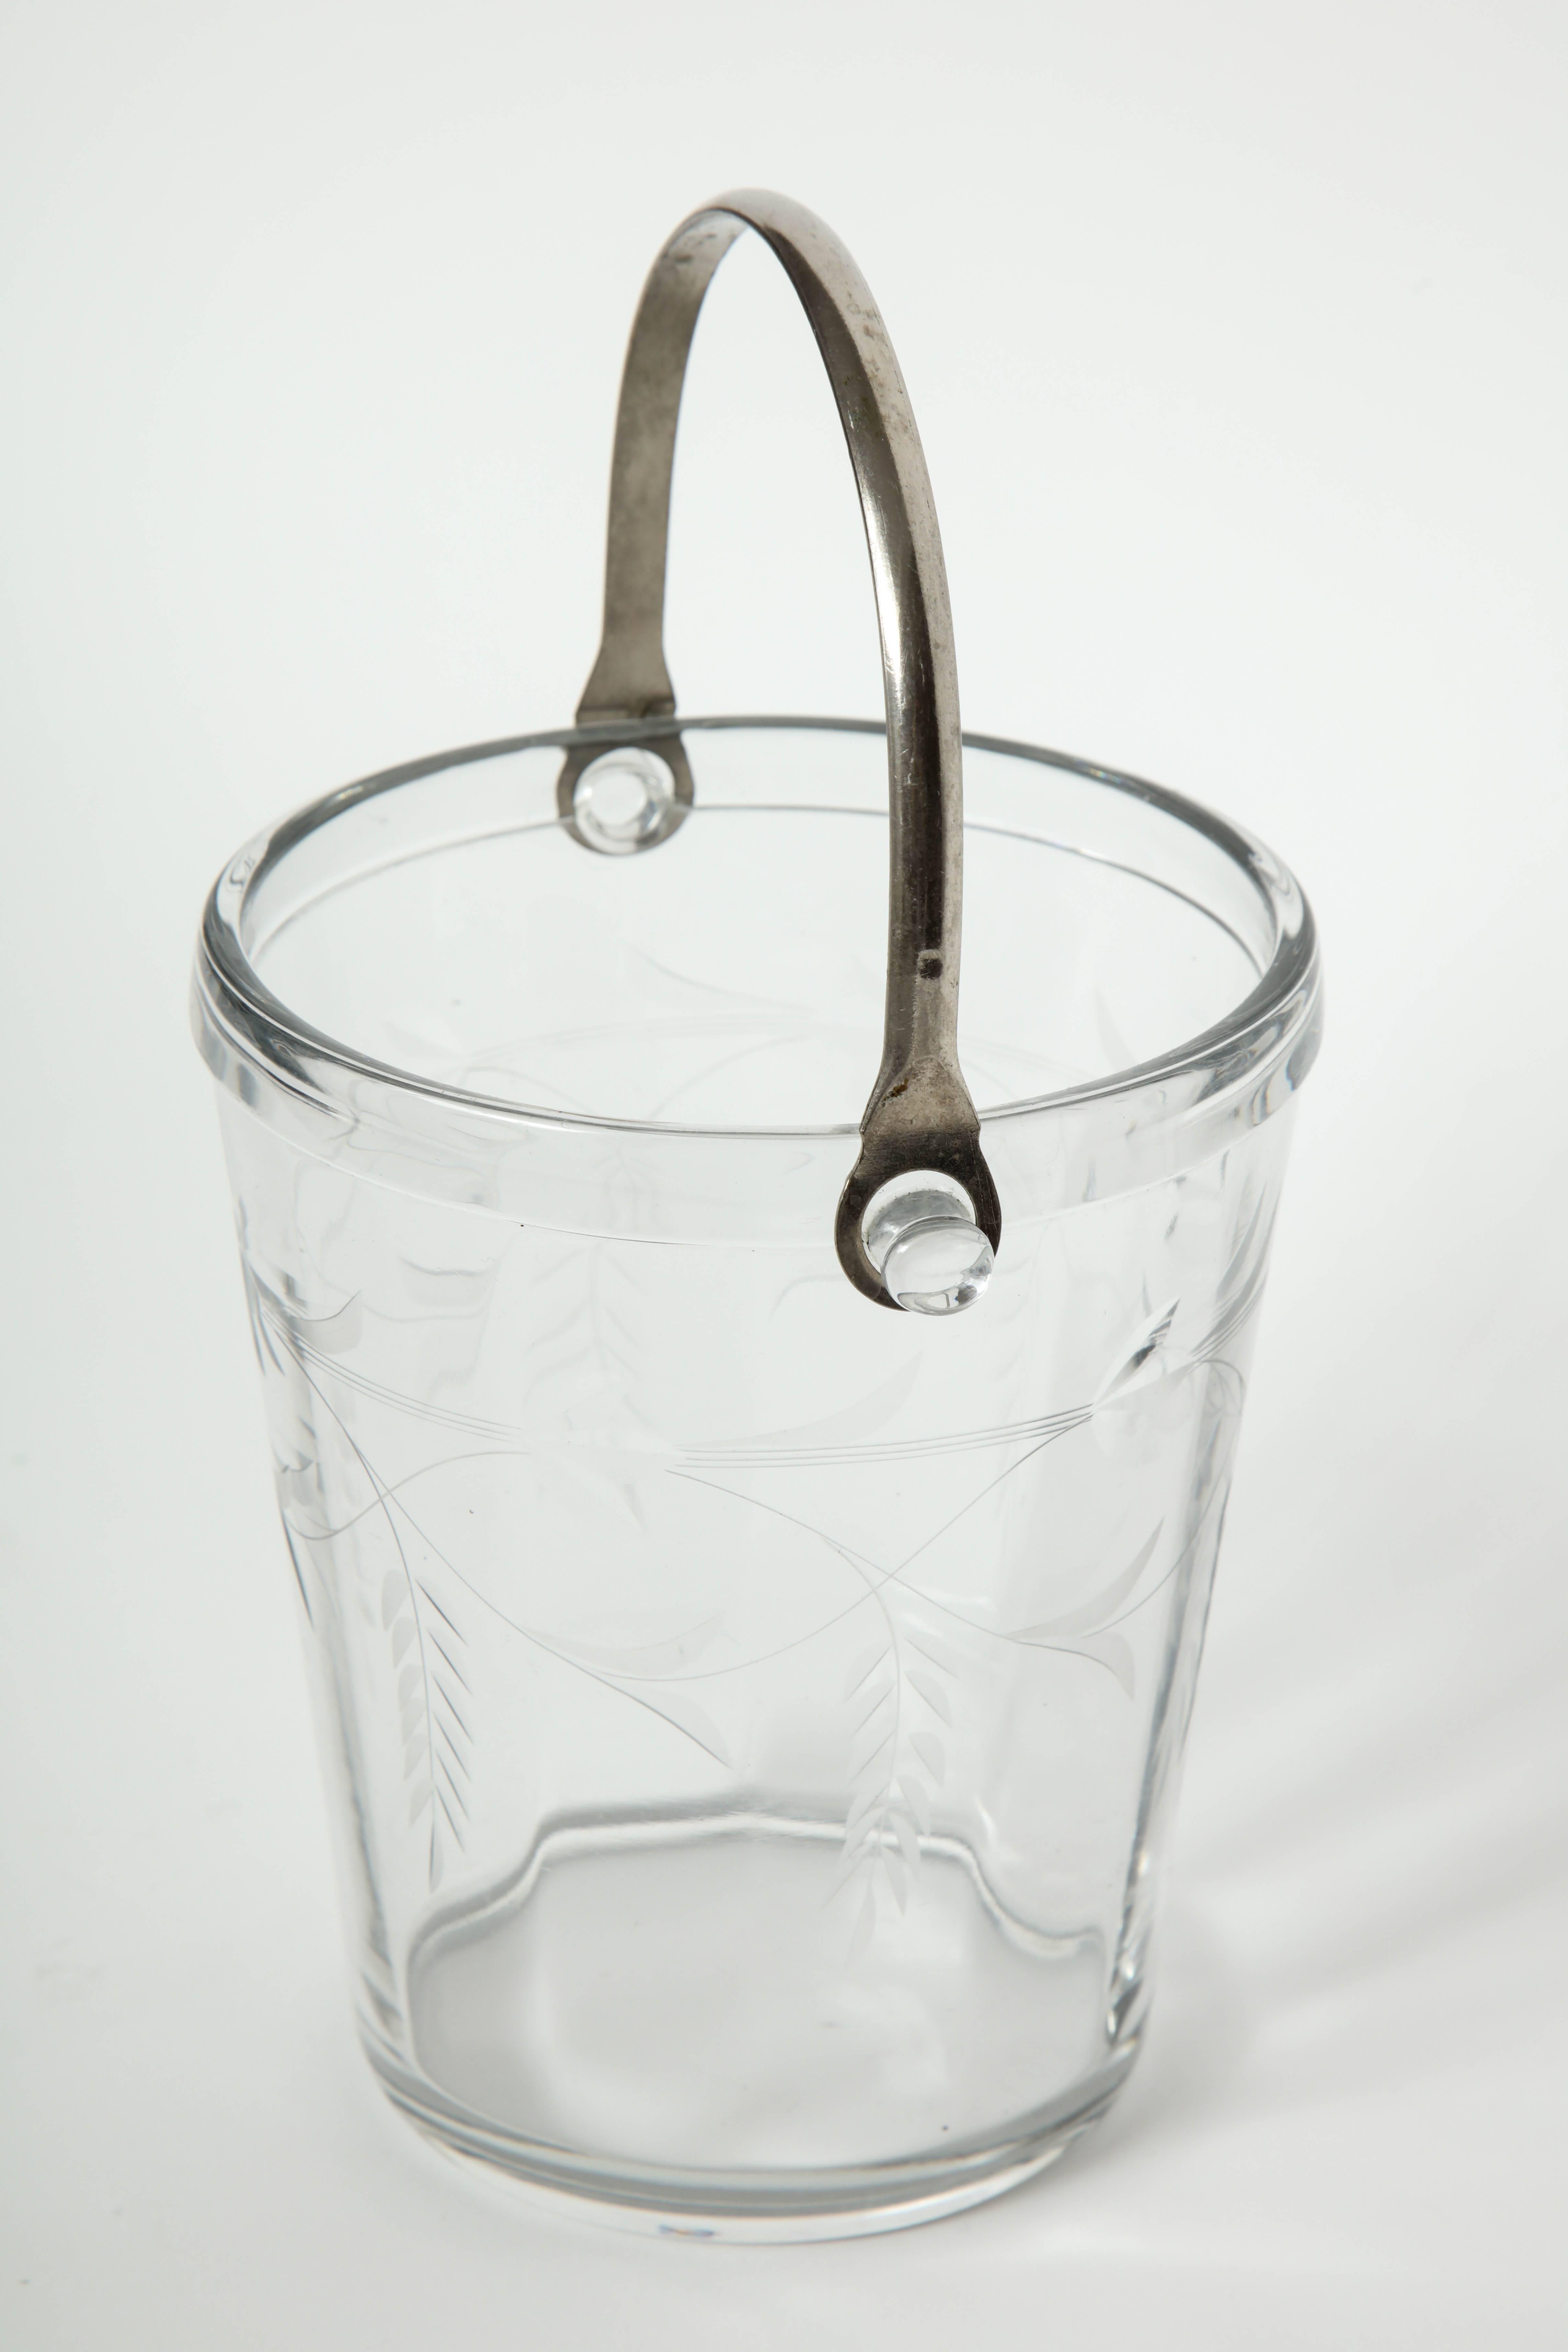 French Art Deco period ice bucket with a hand etched stylized floral/vine pattern and a silver handle.